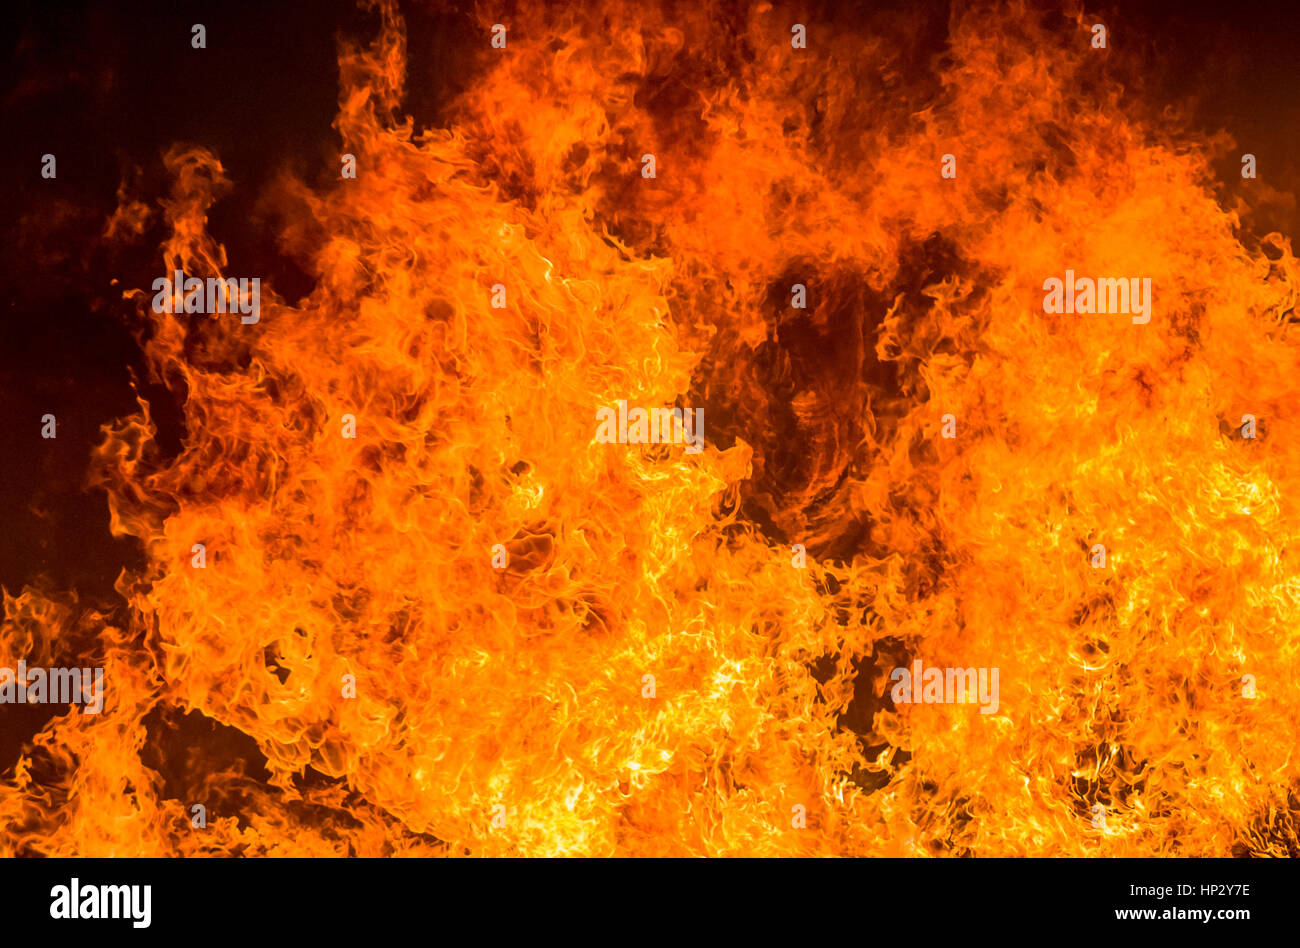 highly detailed abstract fire background Stock Photo